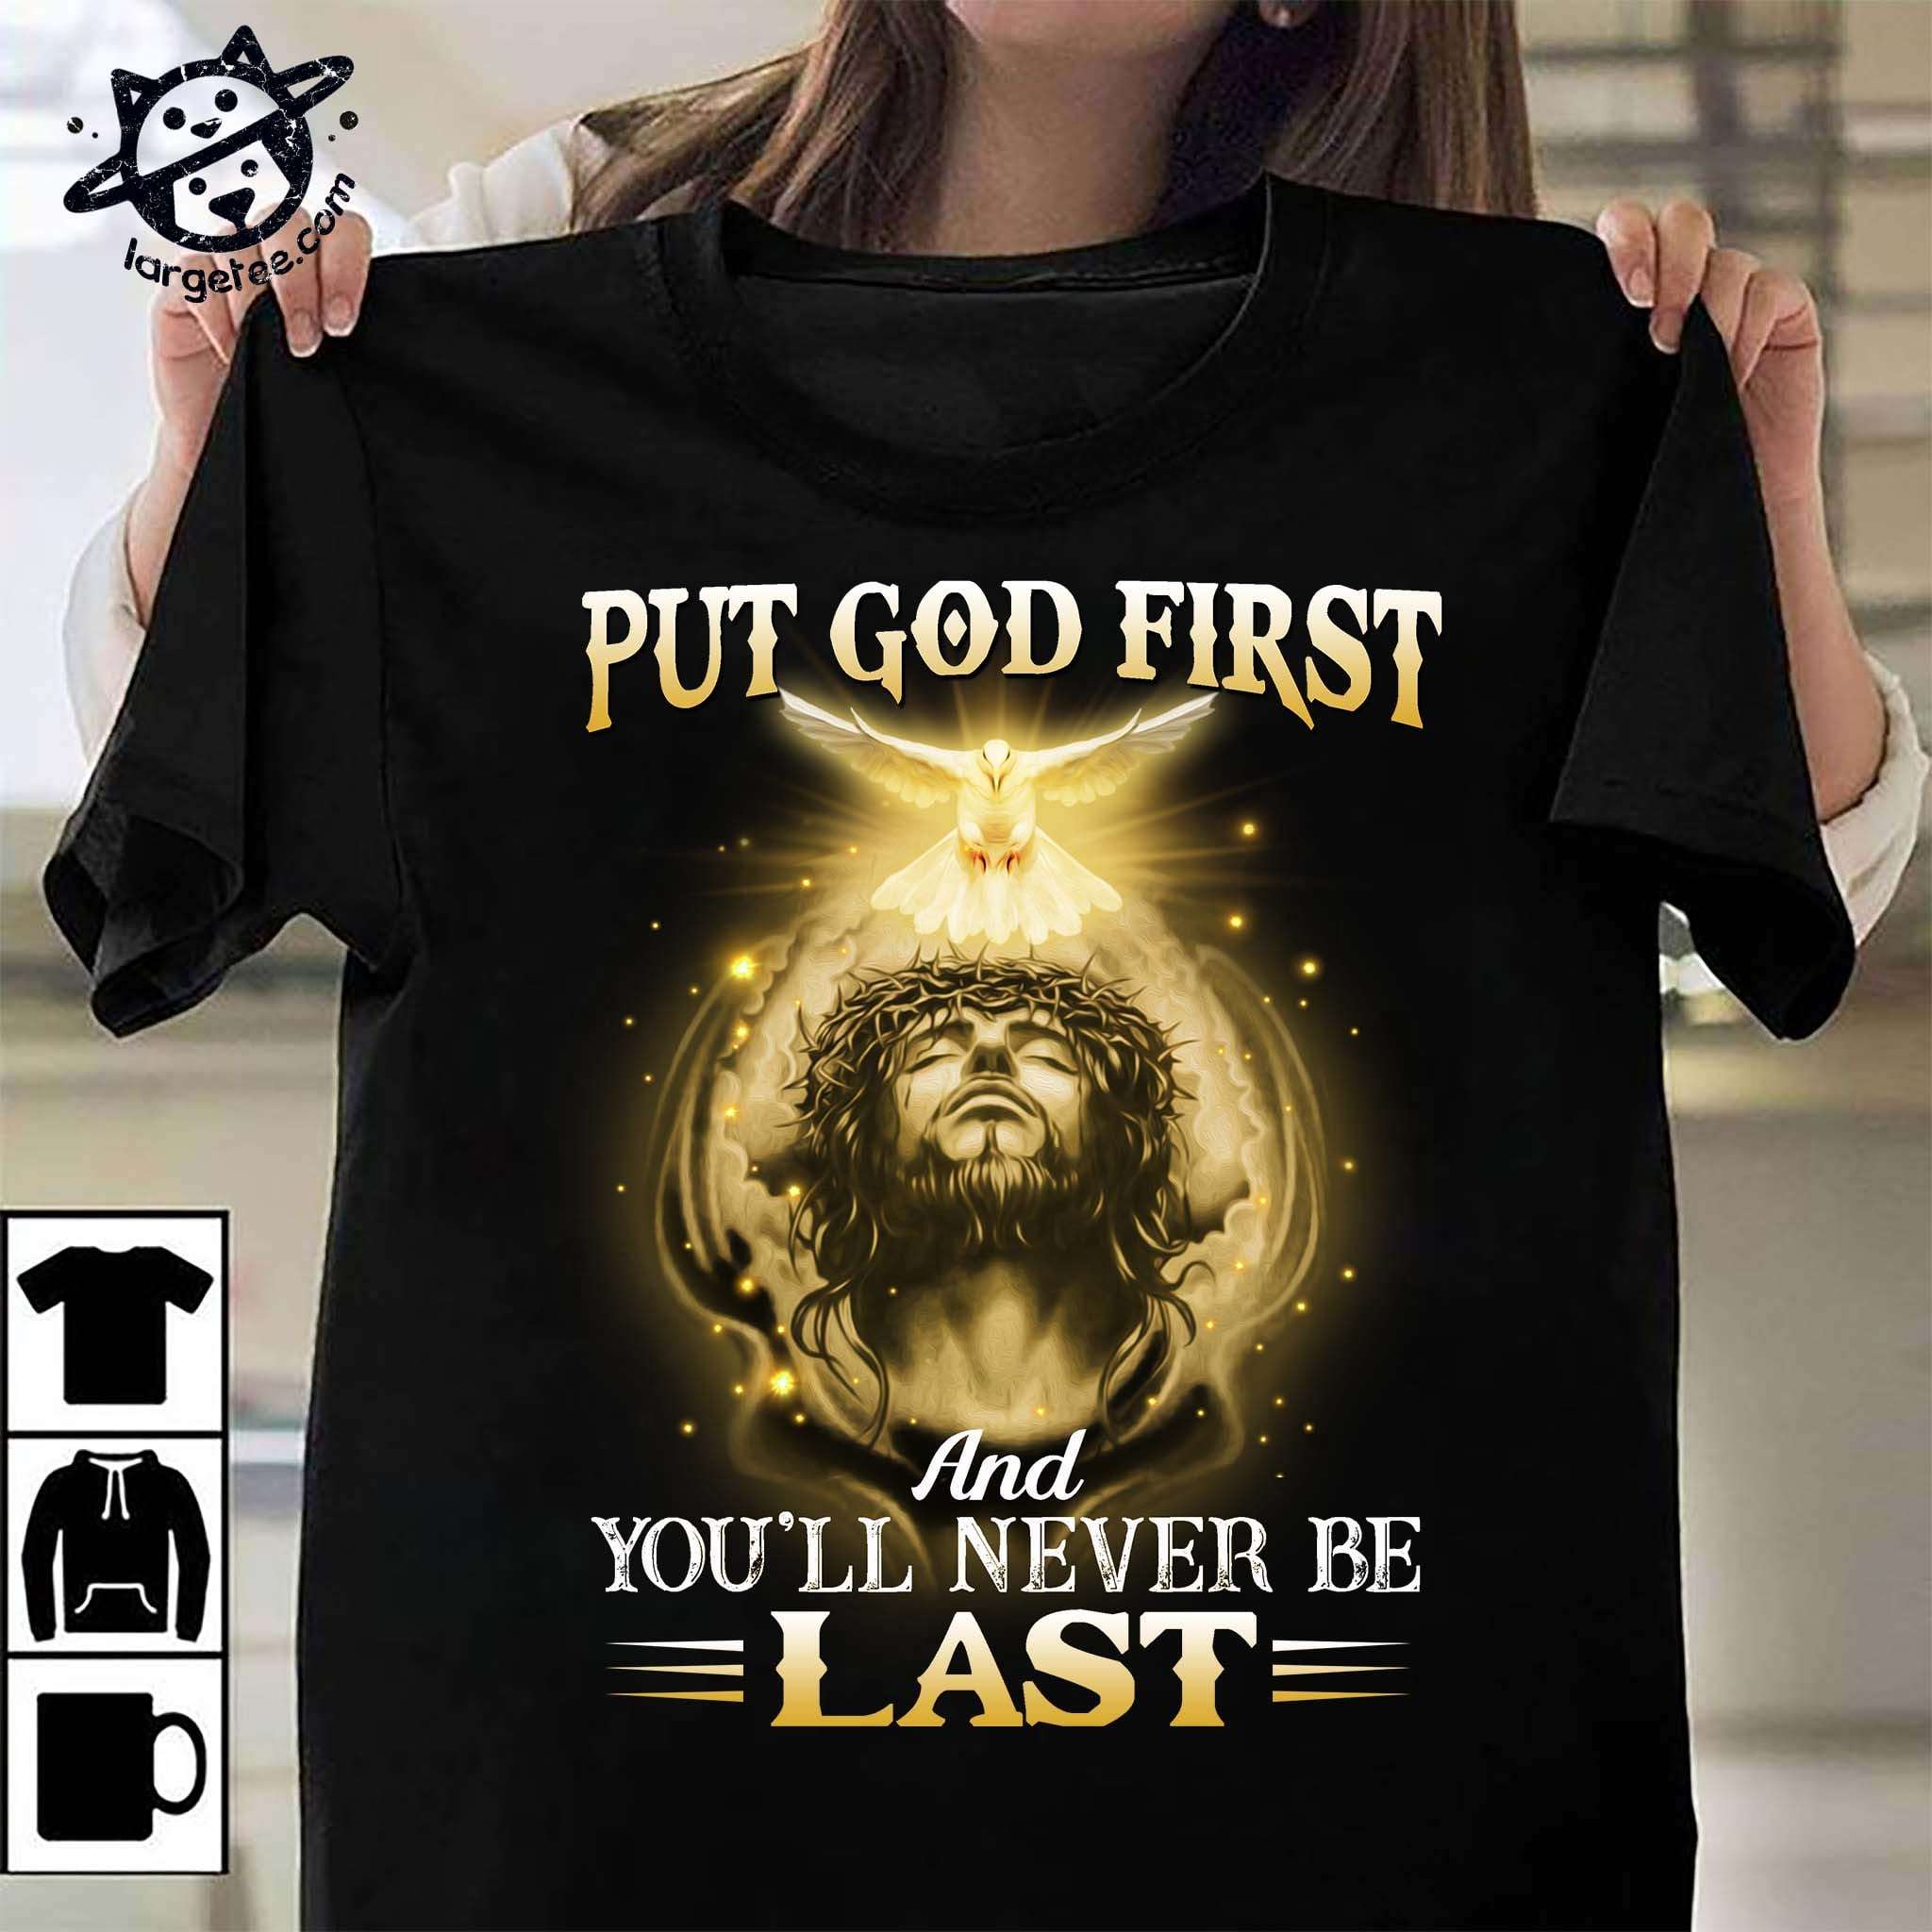 Put God first and you'll never be last - Jesus the god, Jesus and pigeon